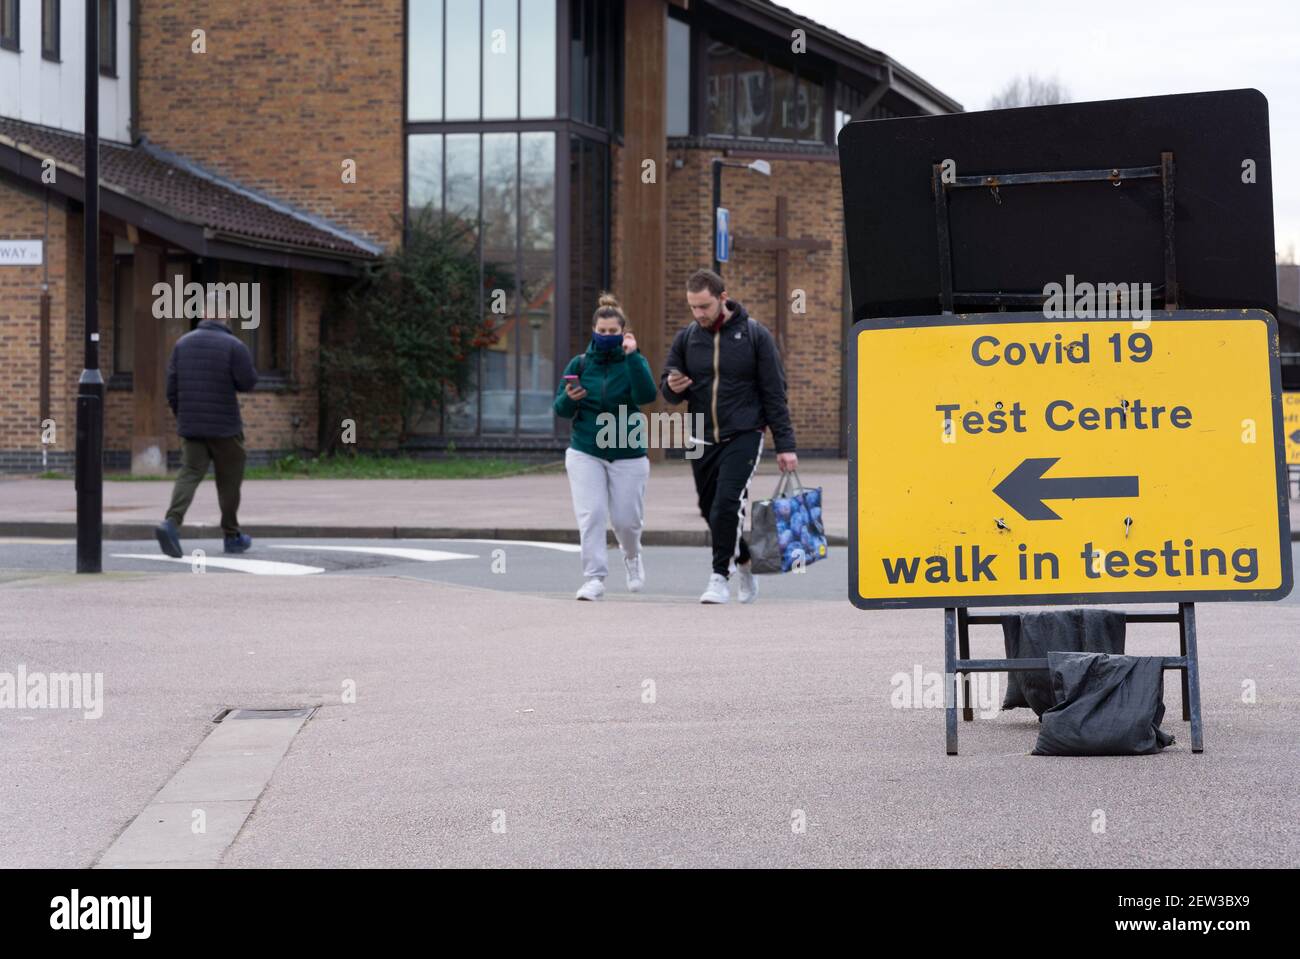 shoppers walk past road sign for covid-19 test centre offering walk-in testing service Stock Photo